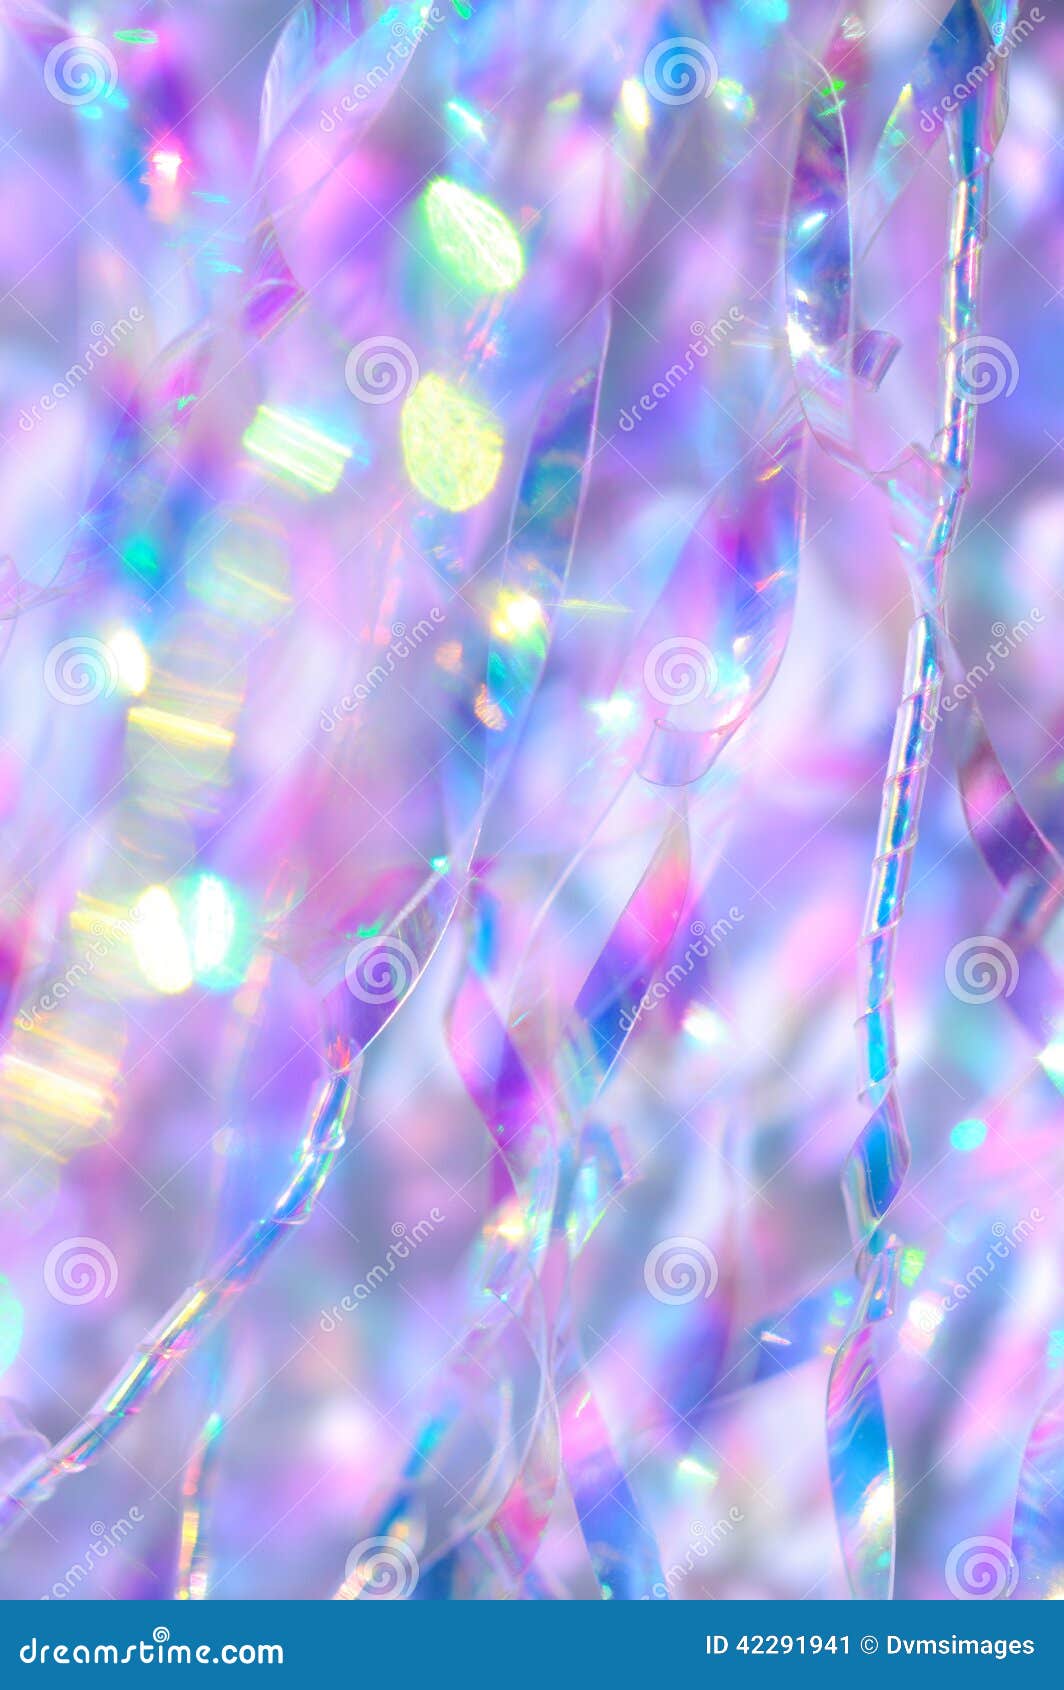 iridescent scatter background